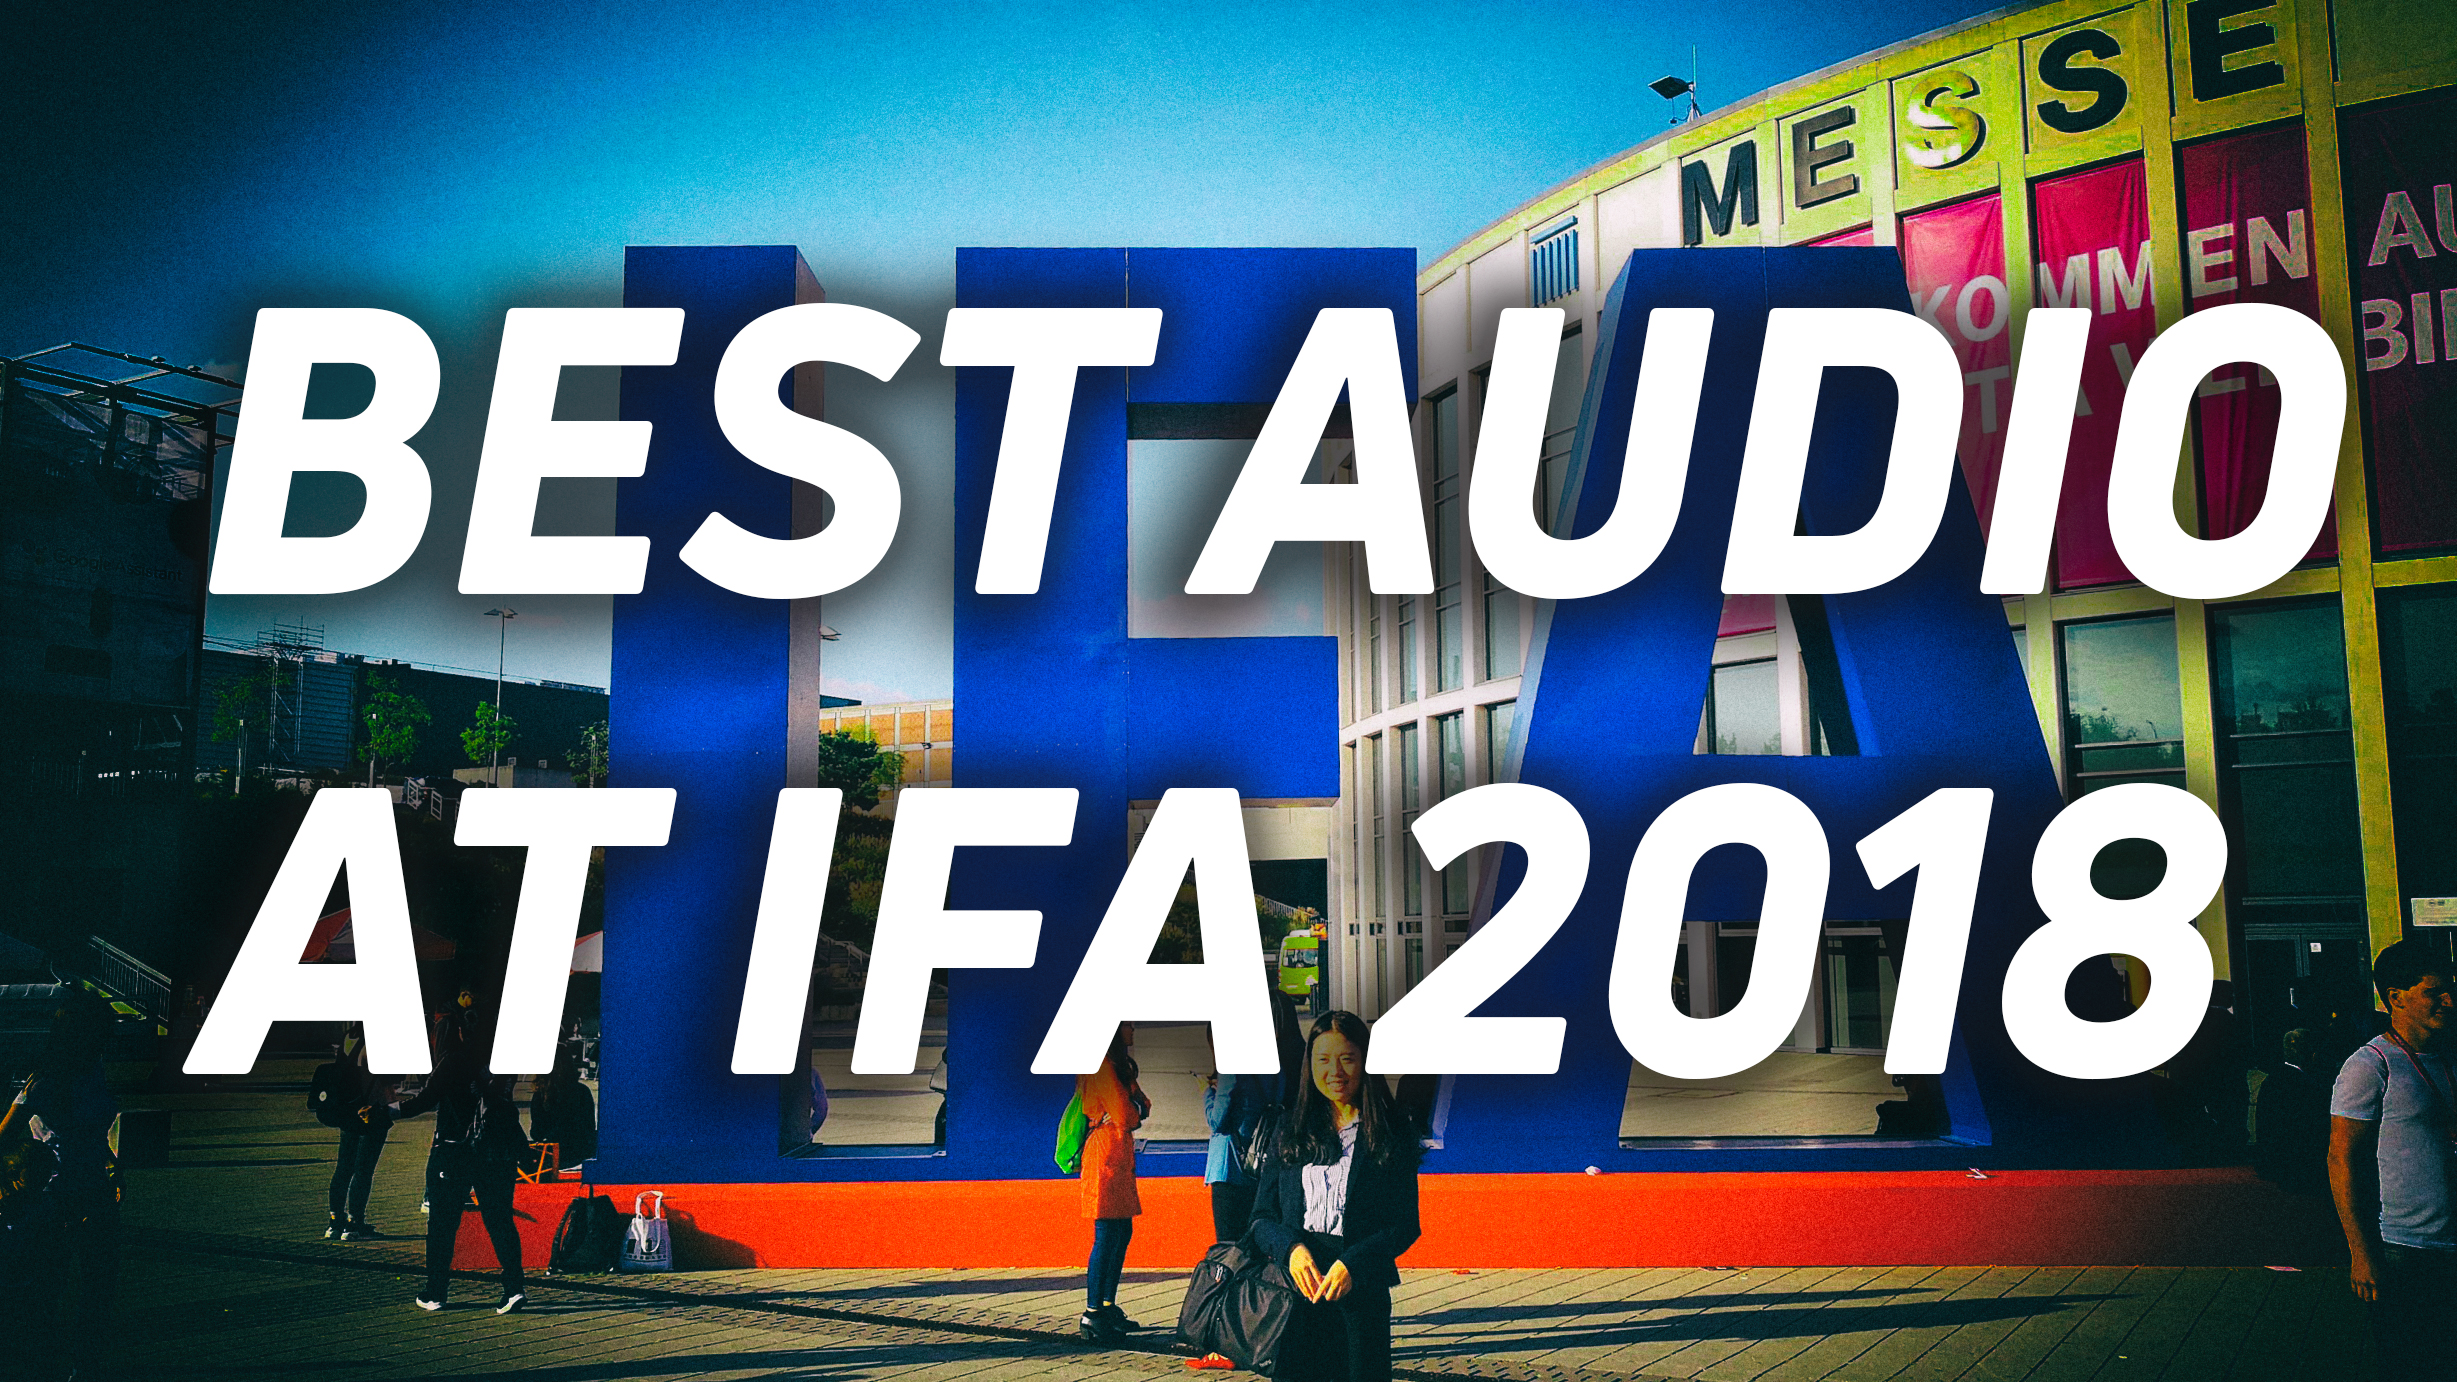 An image of the IFA sign at the conference, with "Best audio at IFA 2018" overlaying the image.